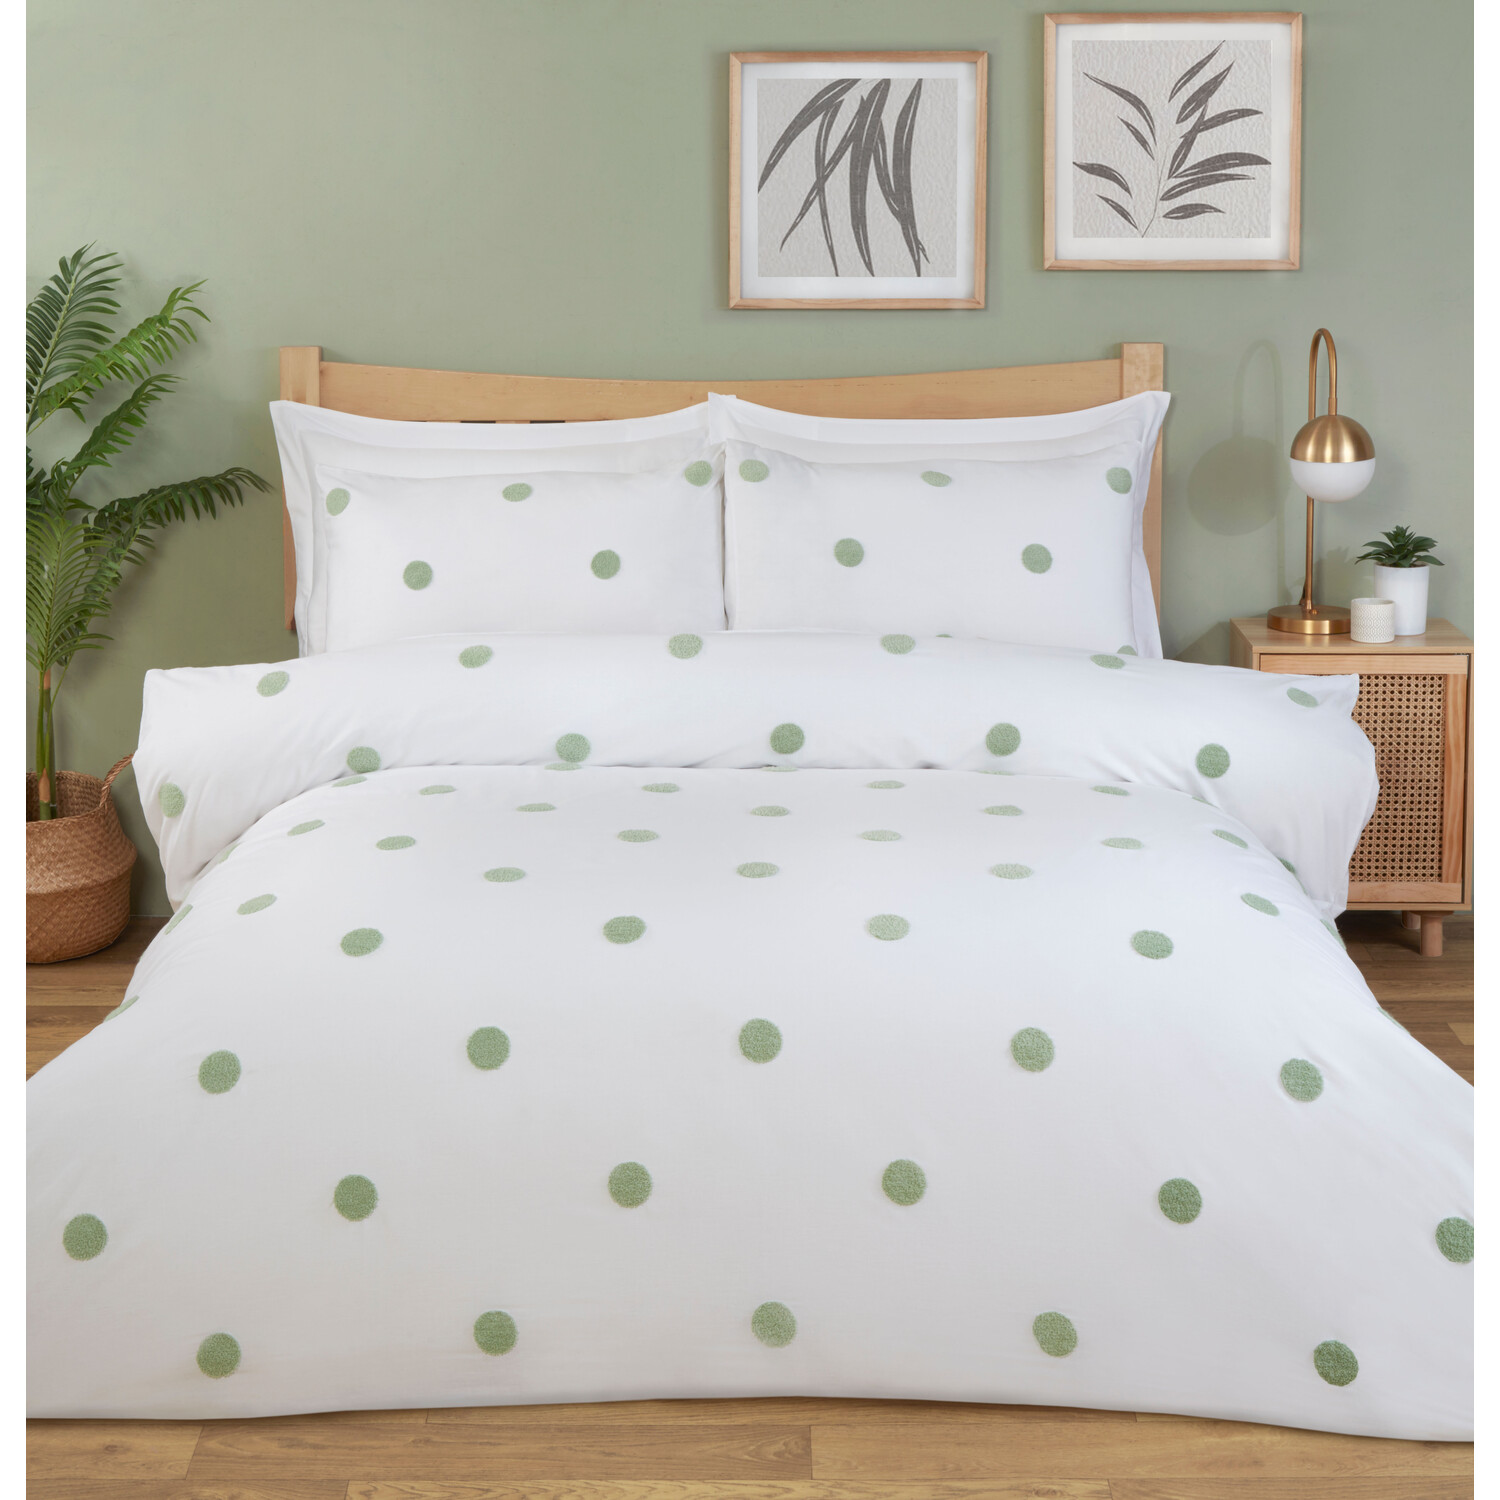 Maia Tufted Dot Duvet Cover and Pillowcase Set - Sage / Double Image 1